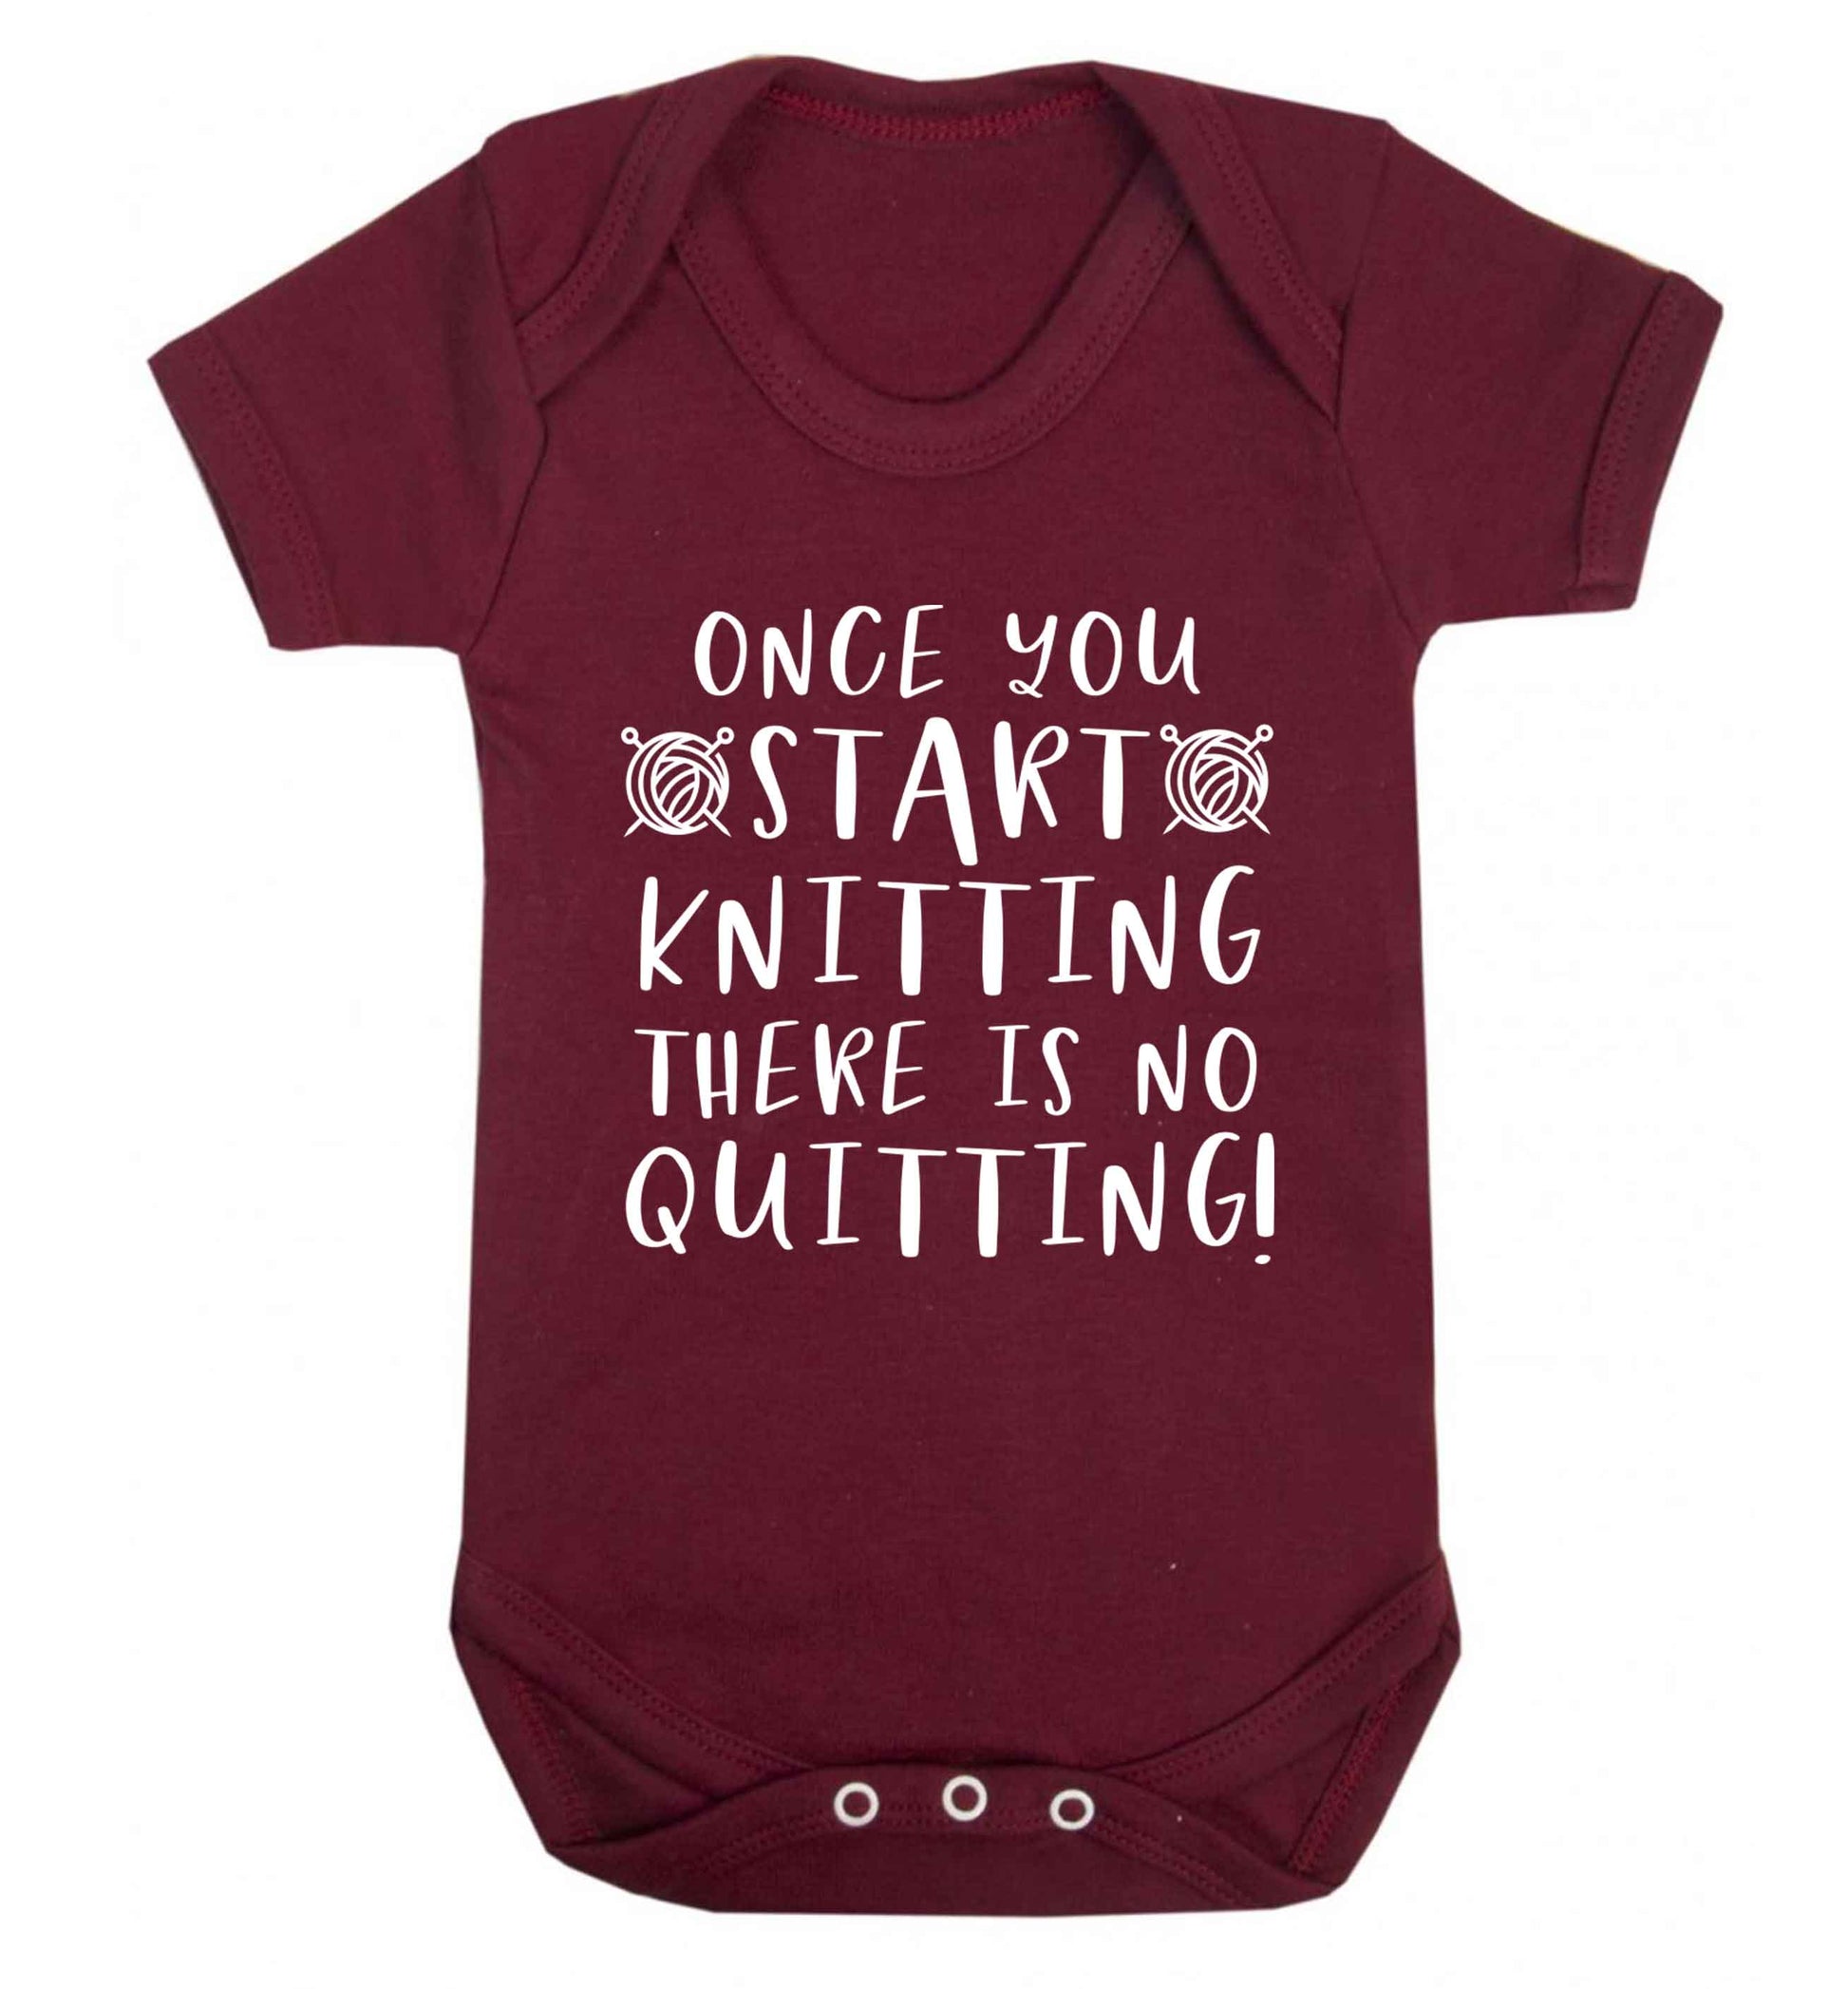 Once you start knitting there is no quitting! Baby Vest maroon 18-24 months